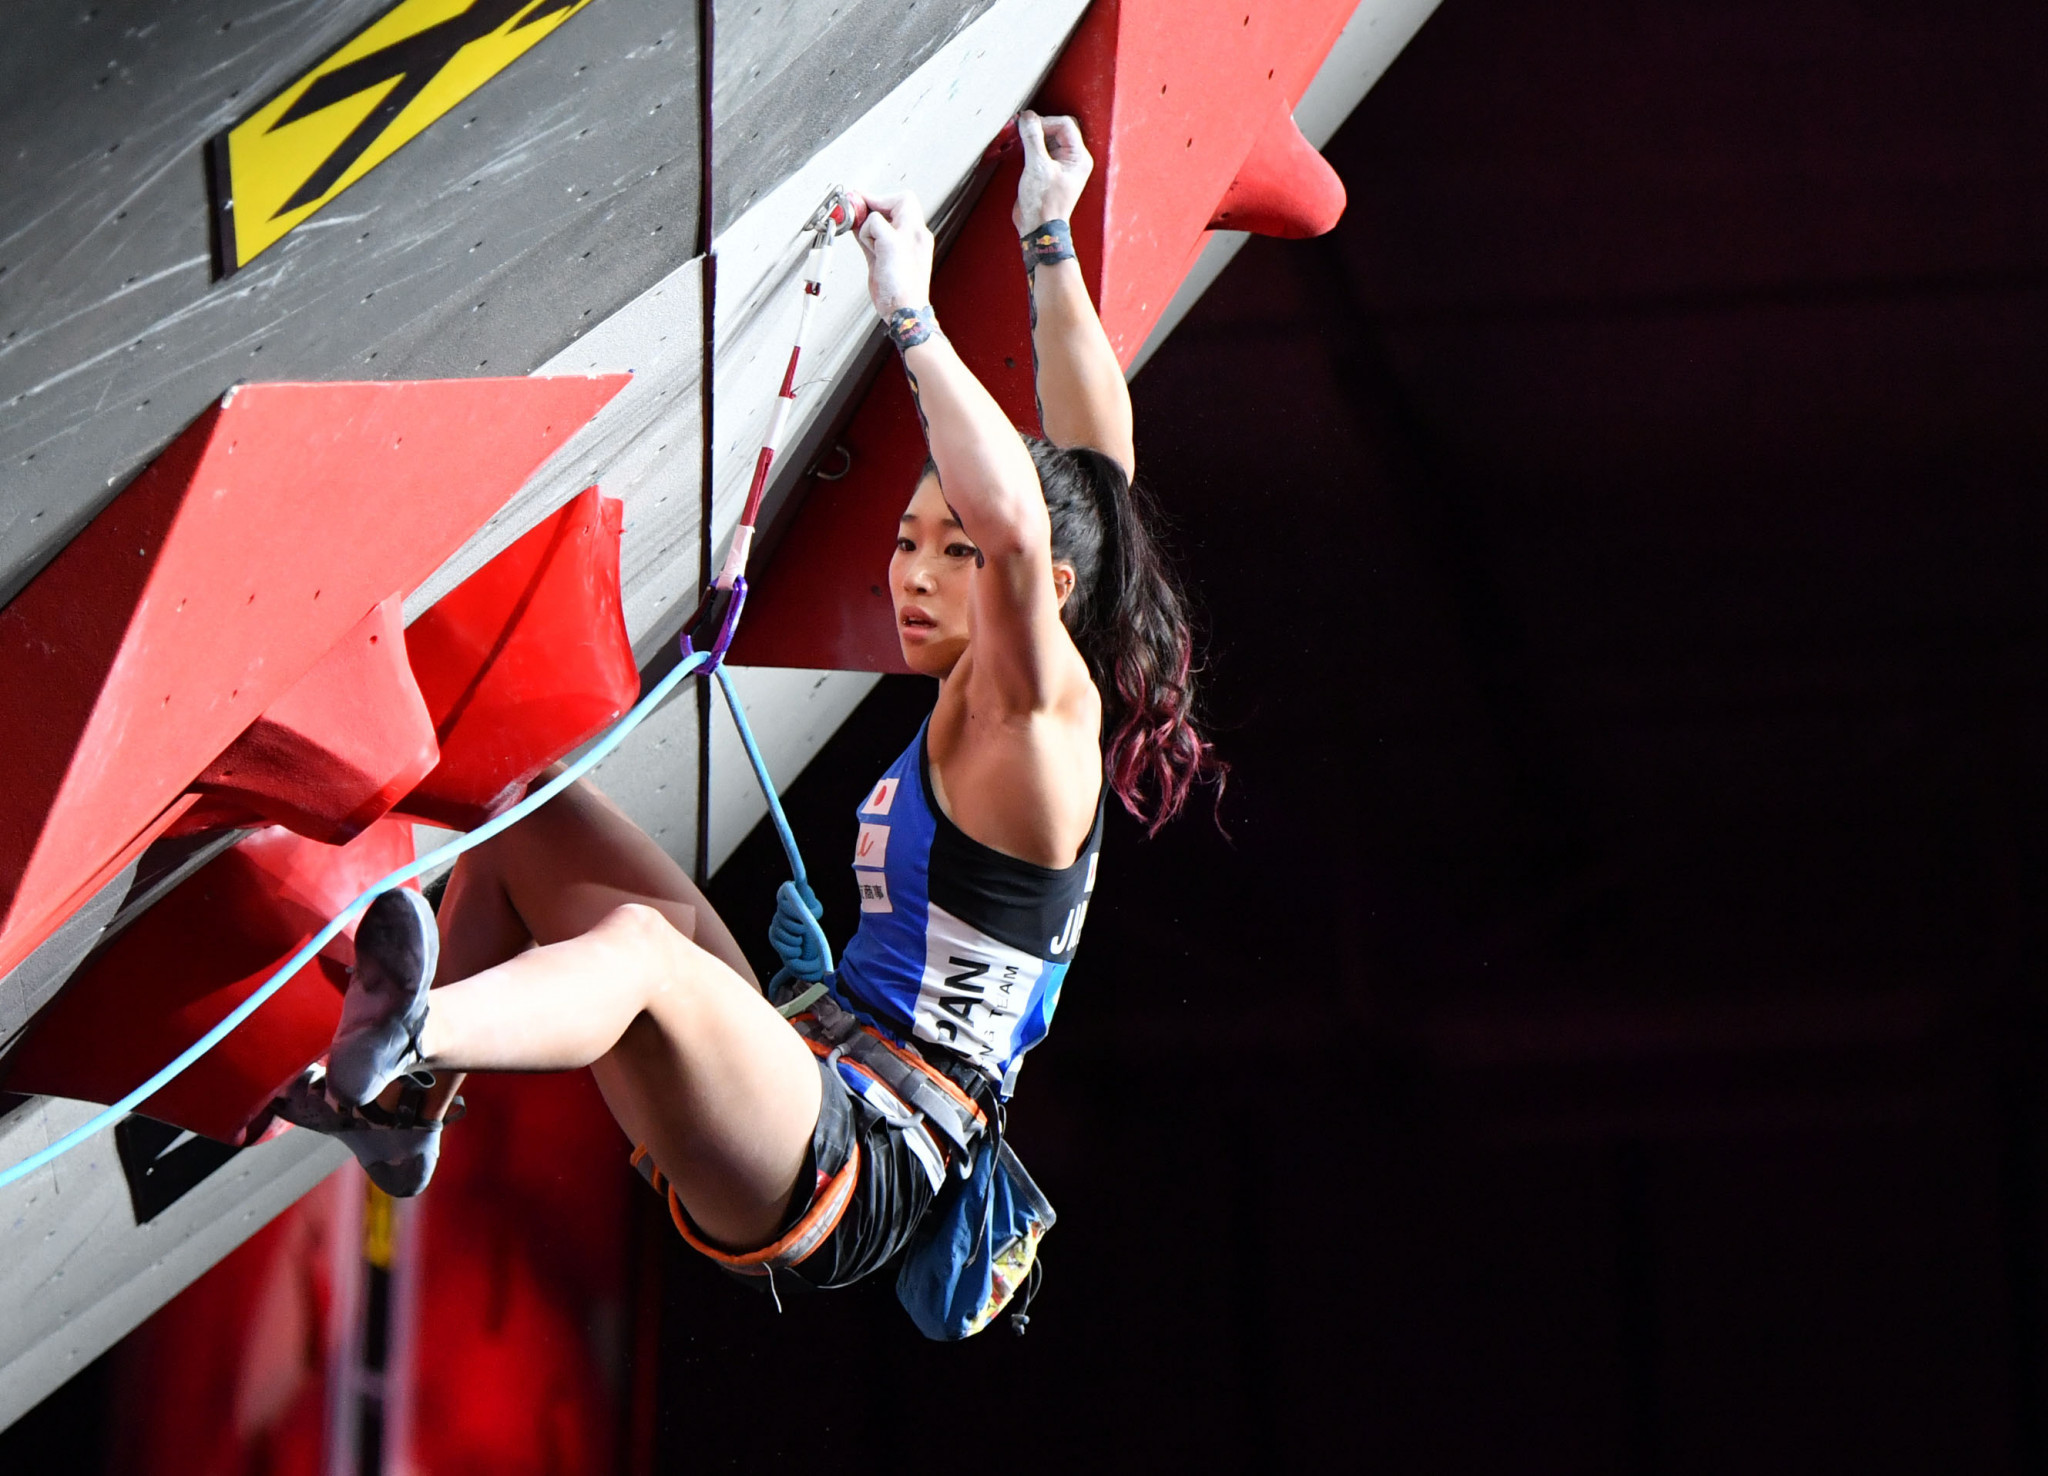 Japan dominate semi-finals of the bouldering event at IFSC Asian Championships 